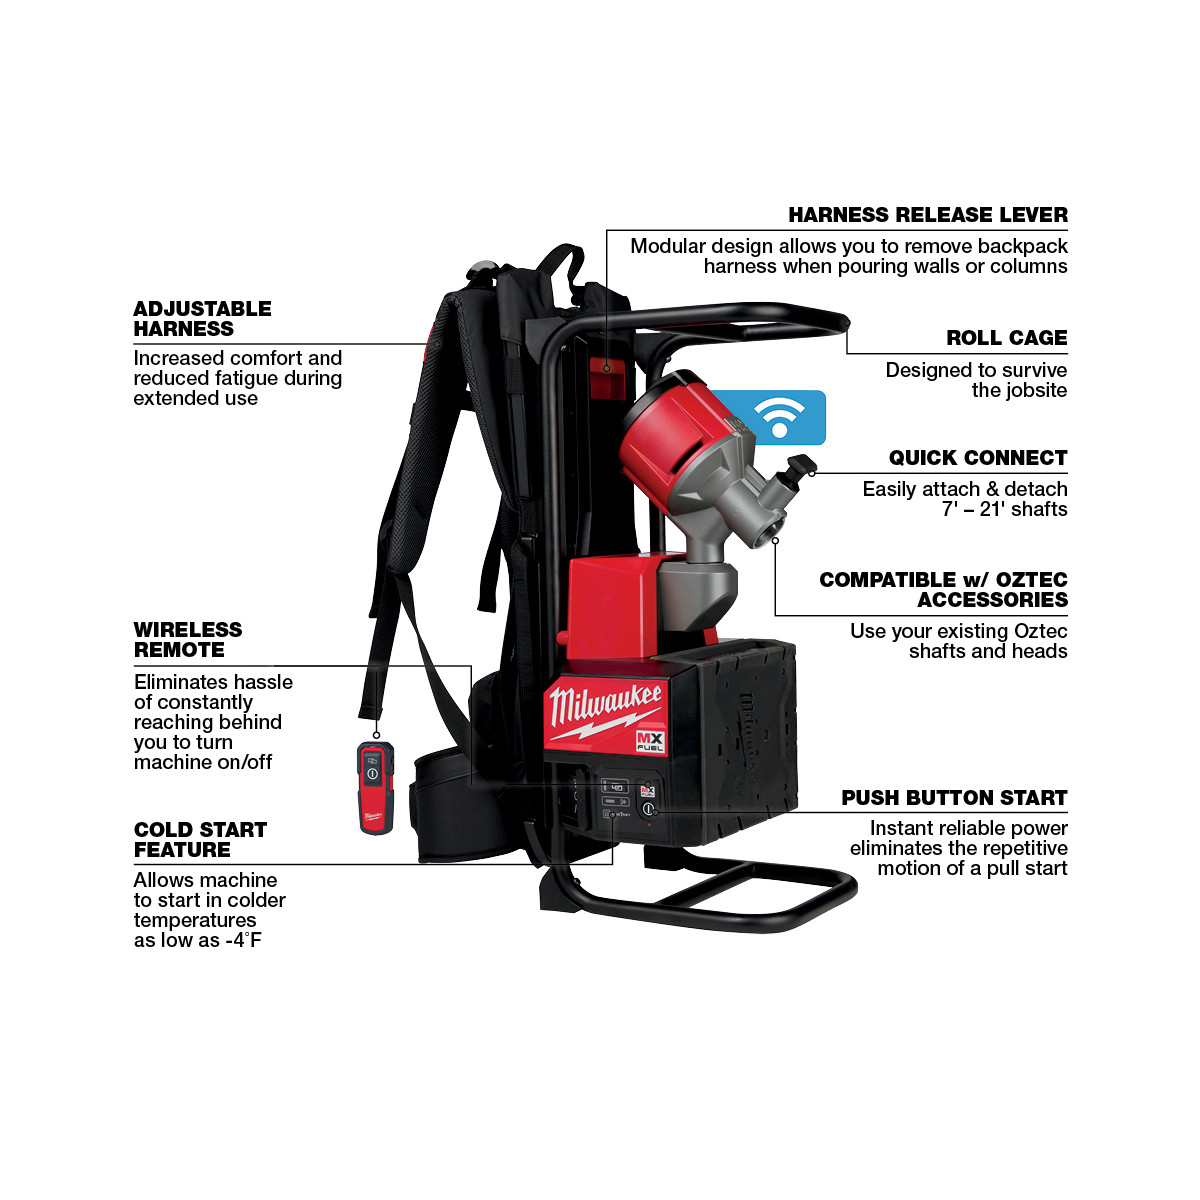 MX FUEL Backpack Concrete Vibrator Kit from GME Supply